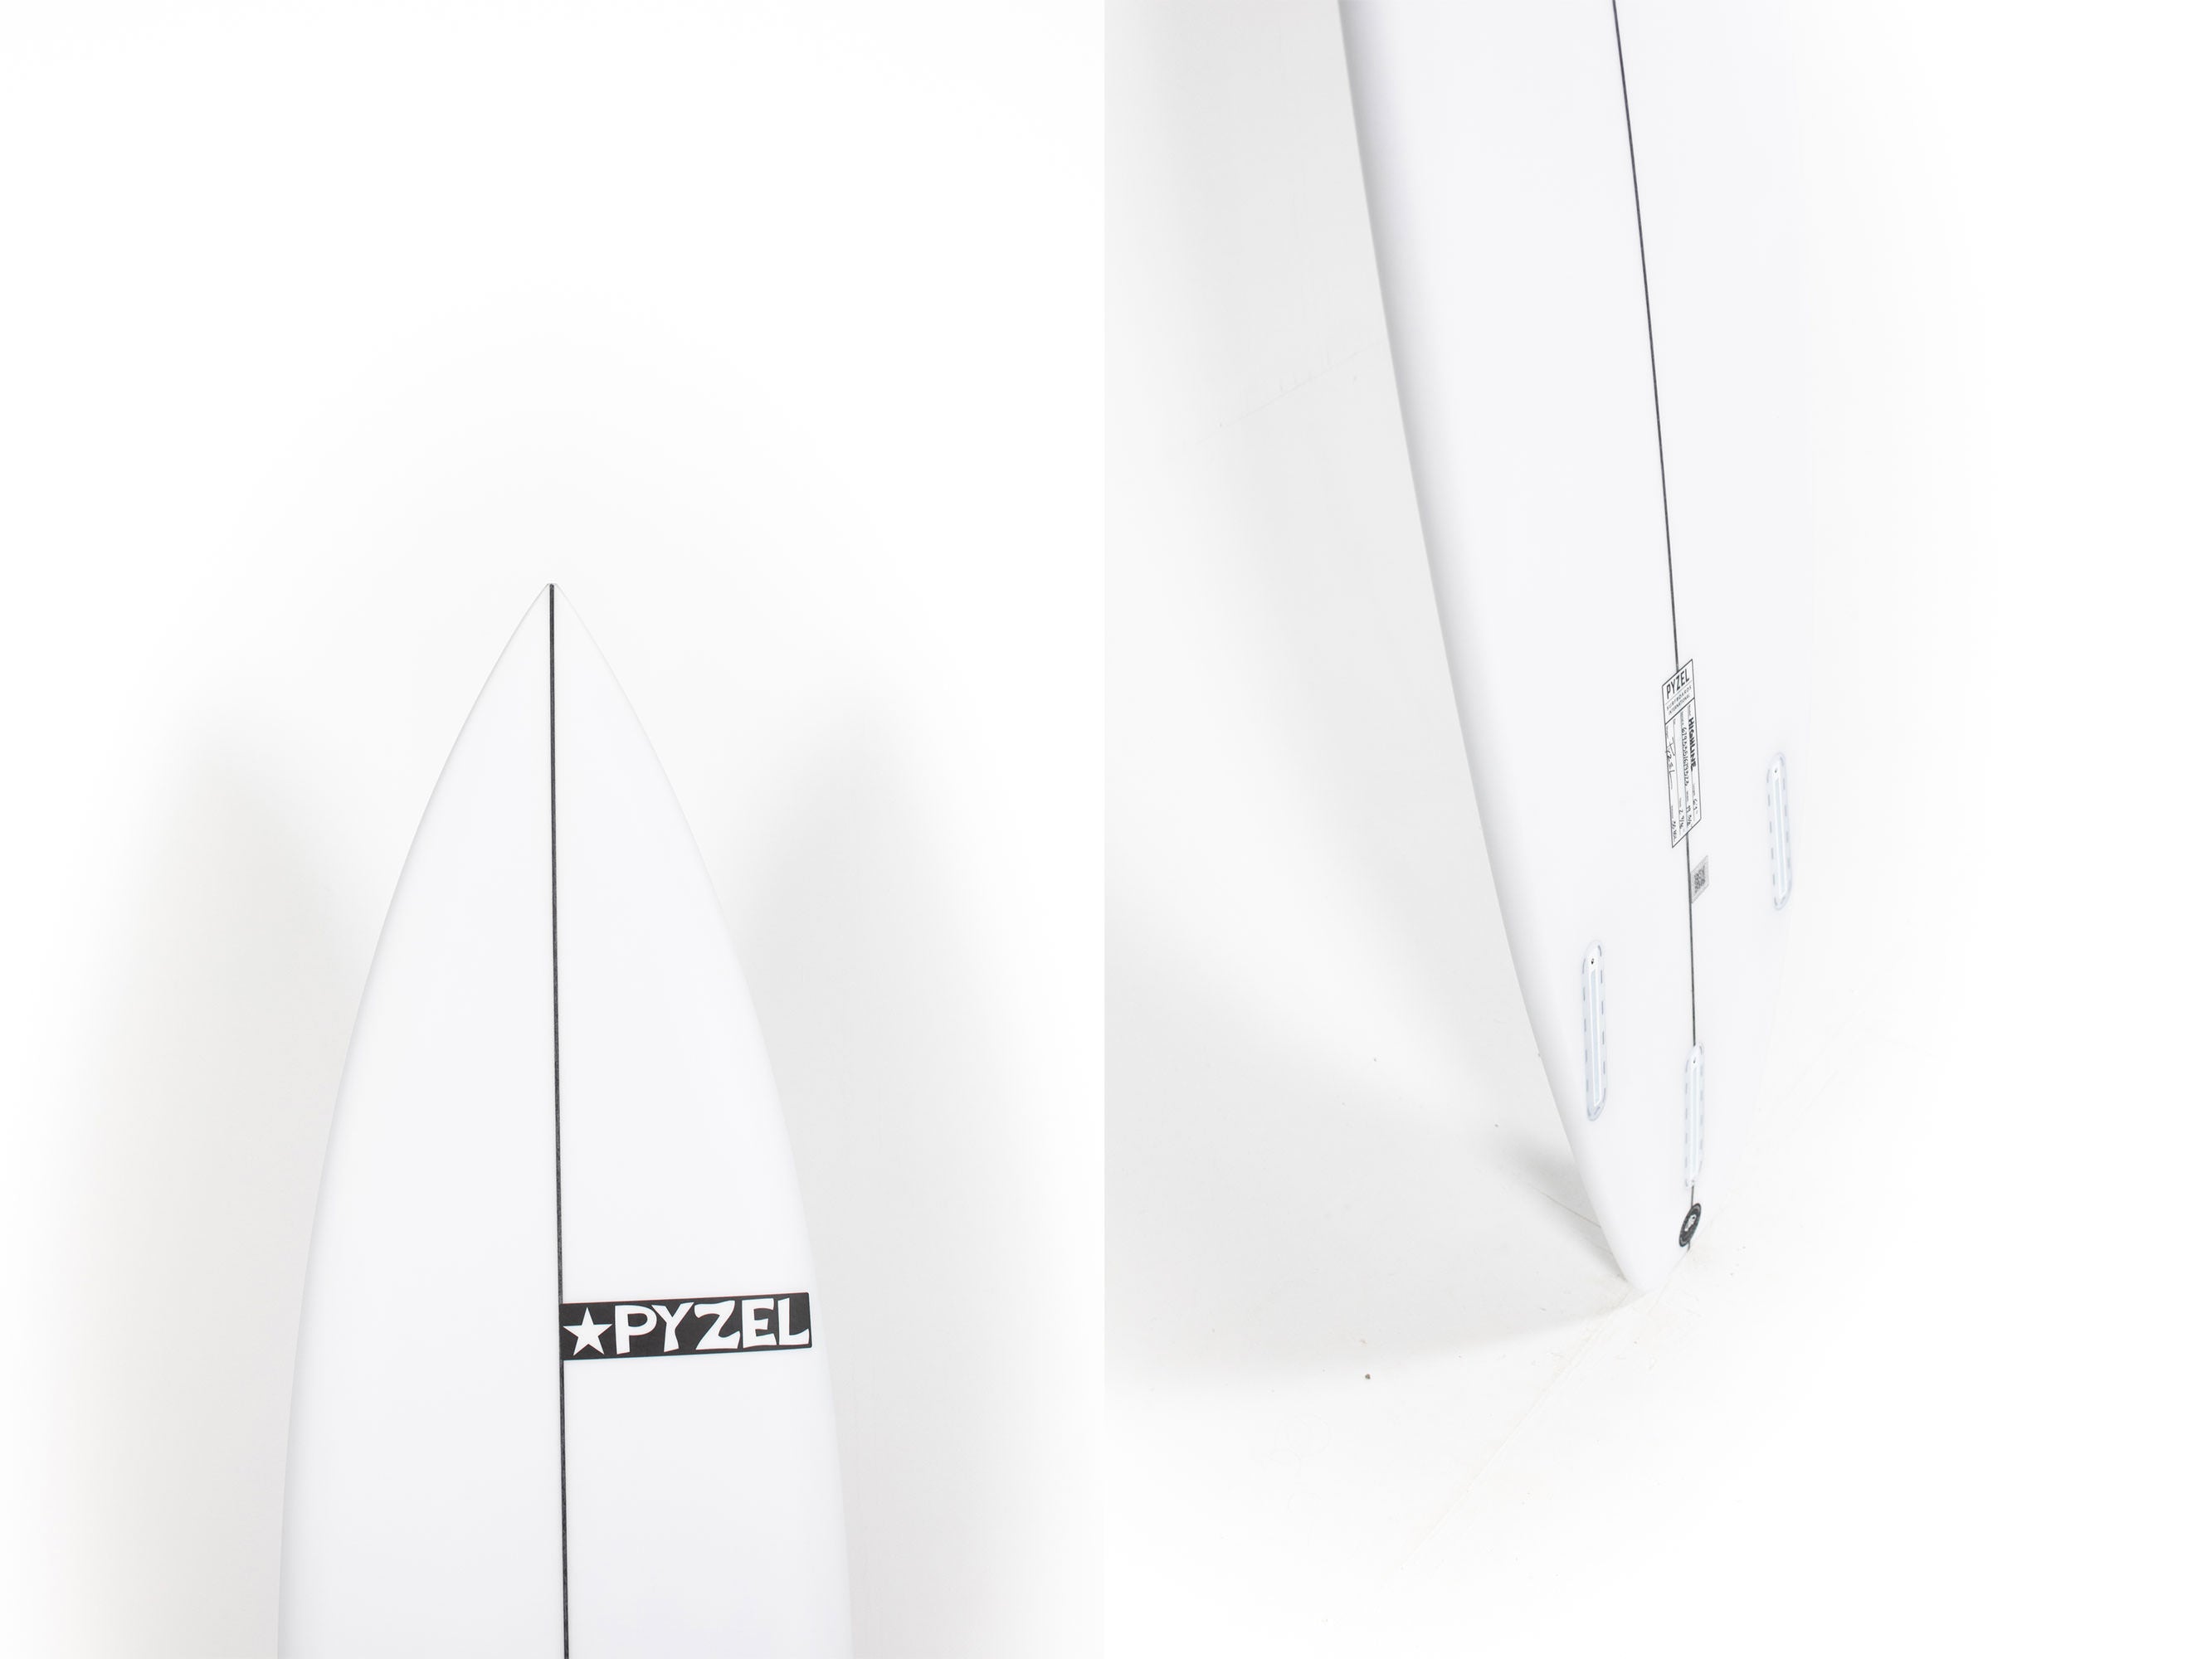 Pyzel Surfboards - HIGH LINE - 6'1" x 19 3/8 x 2 9/16 x 30,80L - Ref: 679323